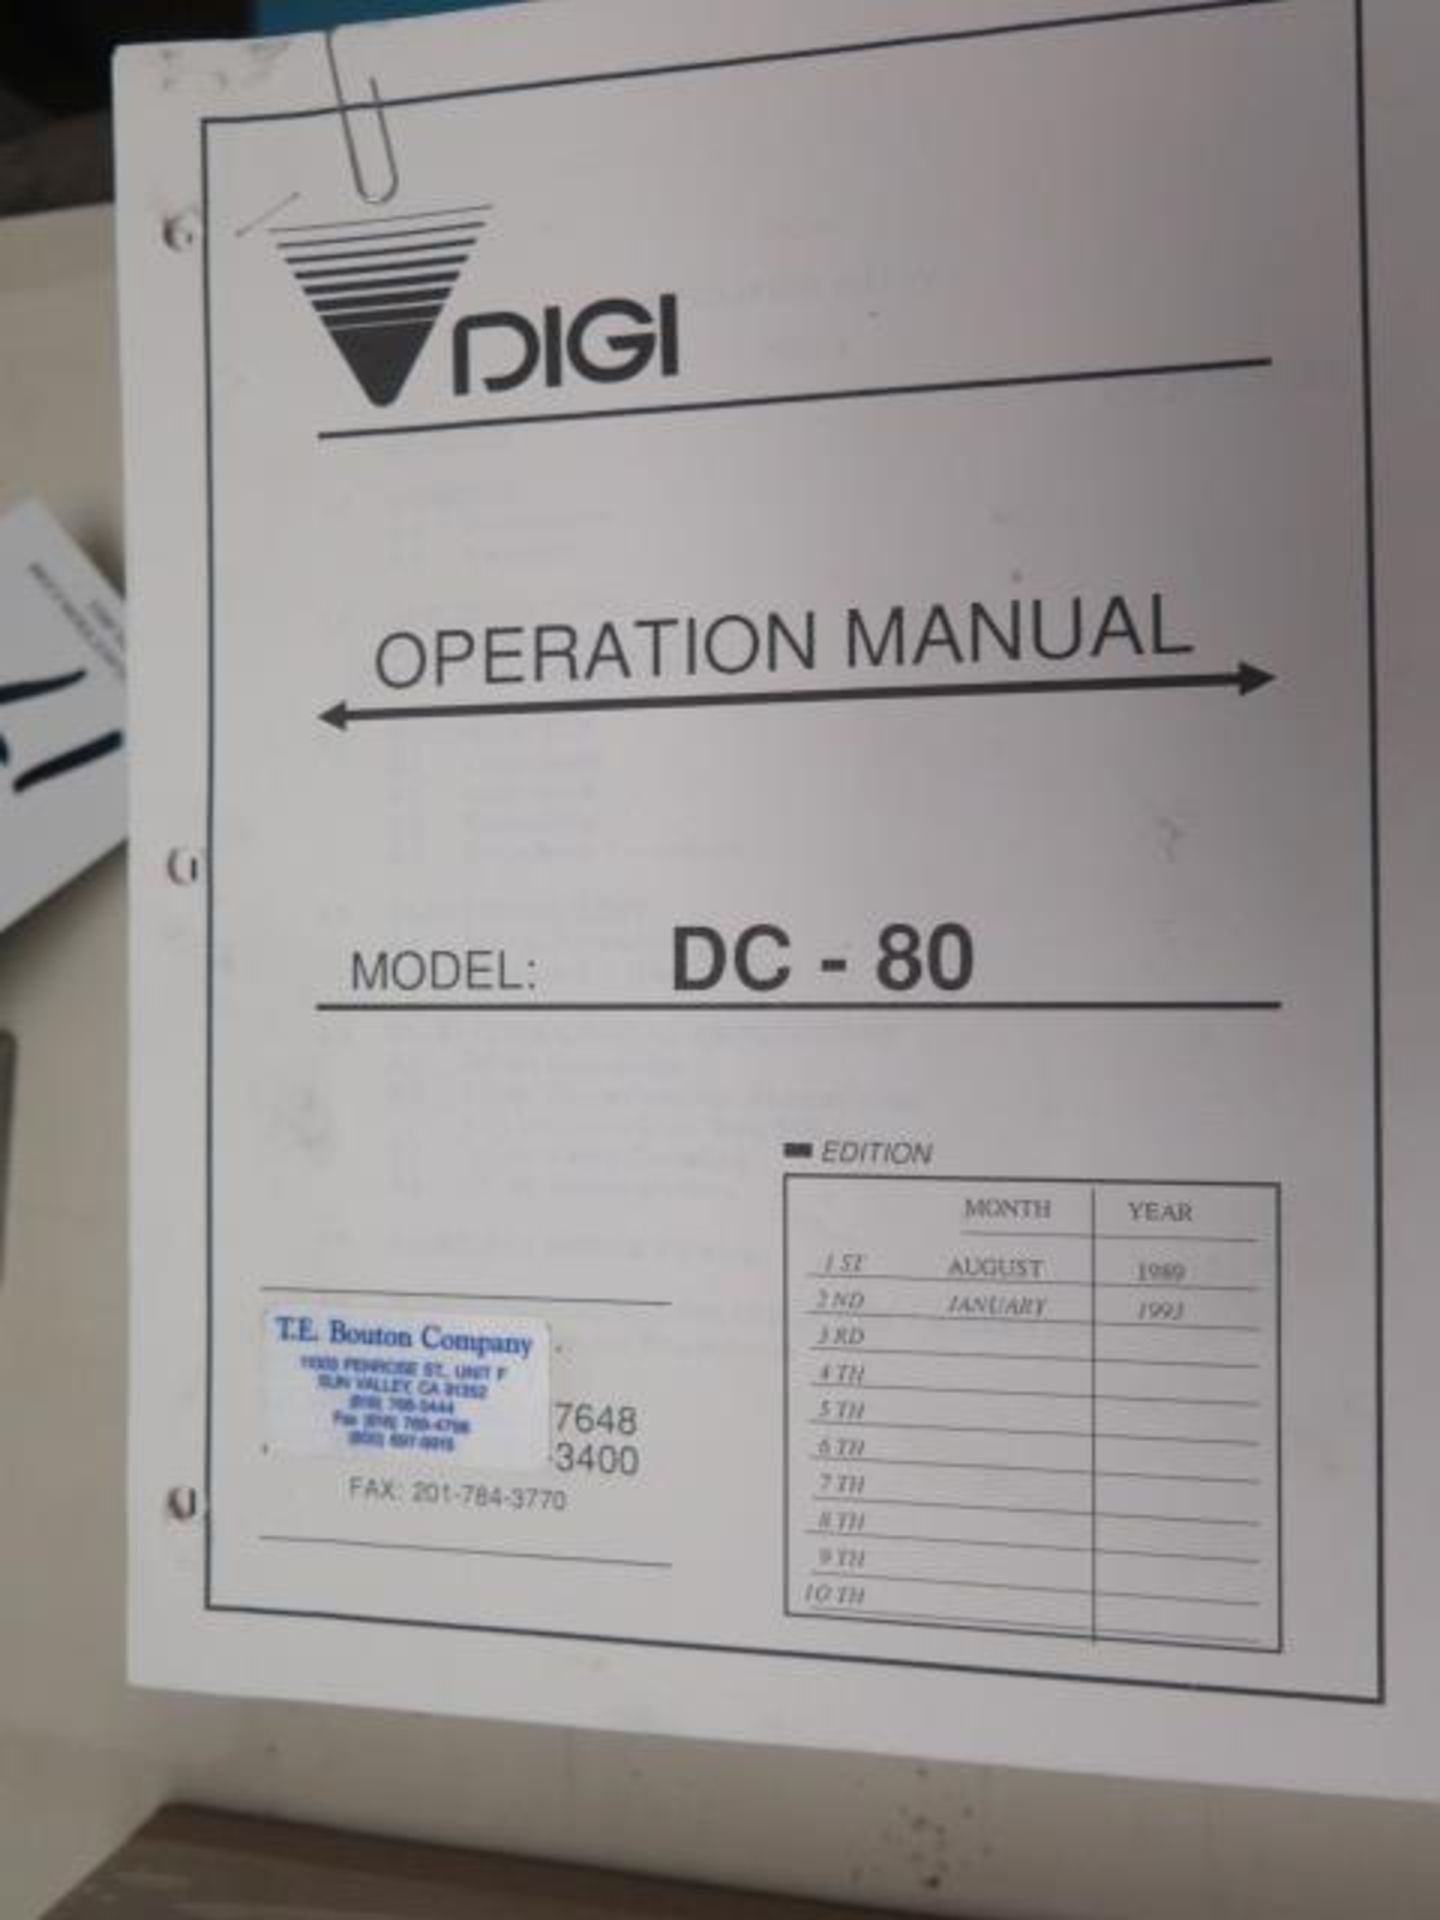 Digi DC-80 Digital Counting Scale (SOLD AS-IS - NO WARRANTY) - Image 3 of 3